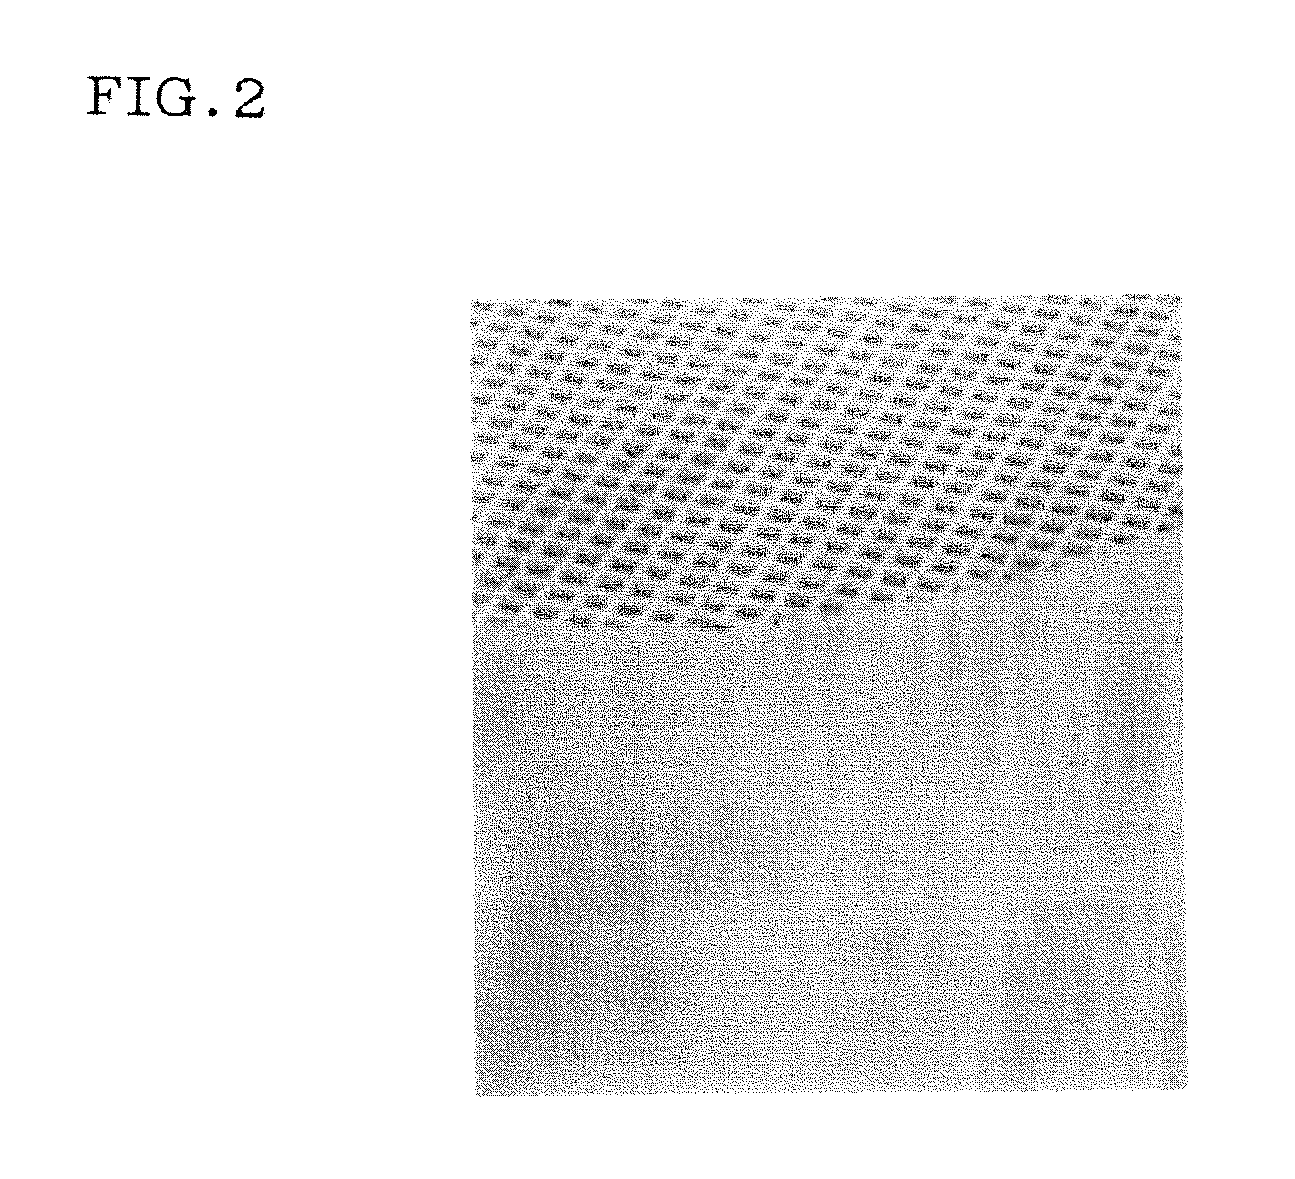 Cordierite ceramic and method for manufacturing the same